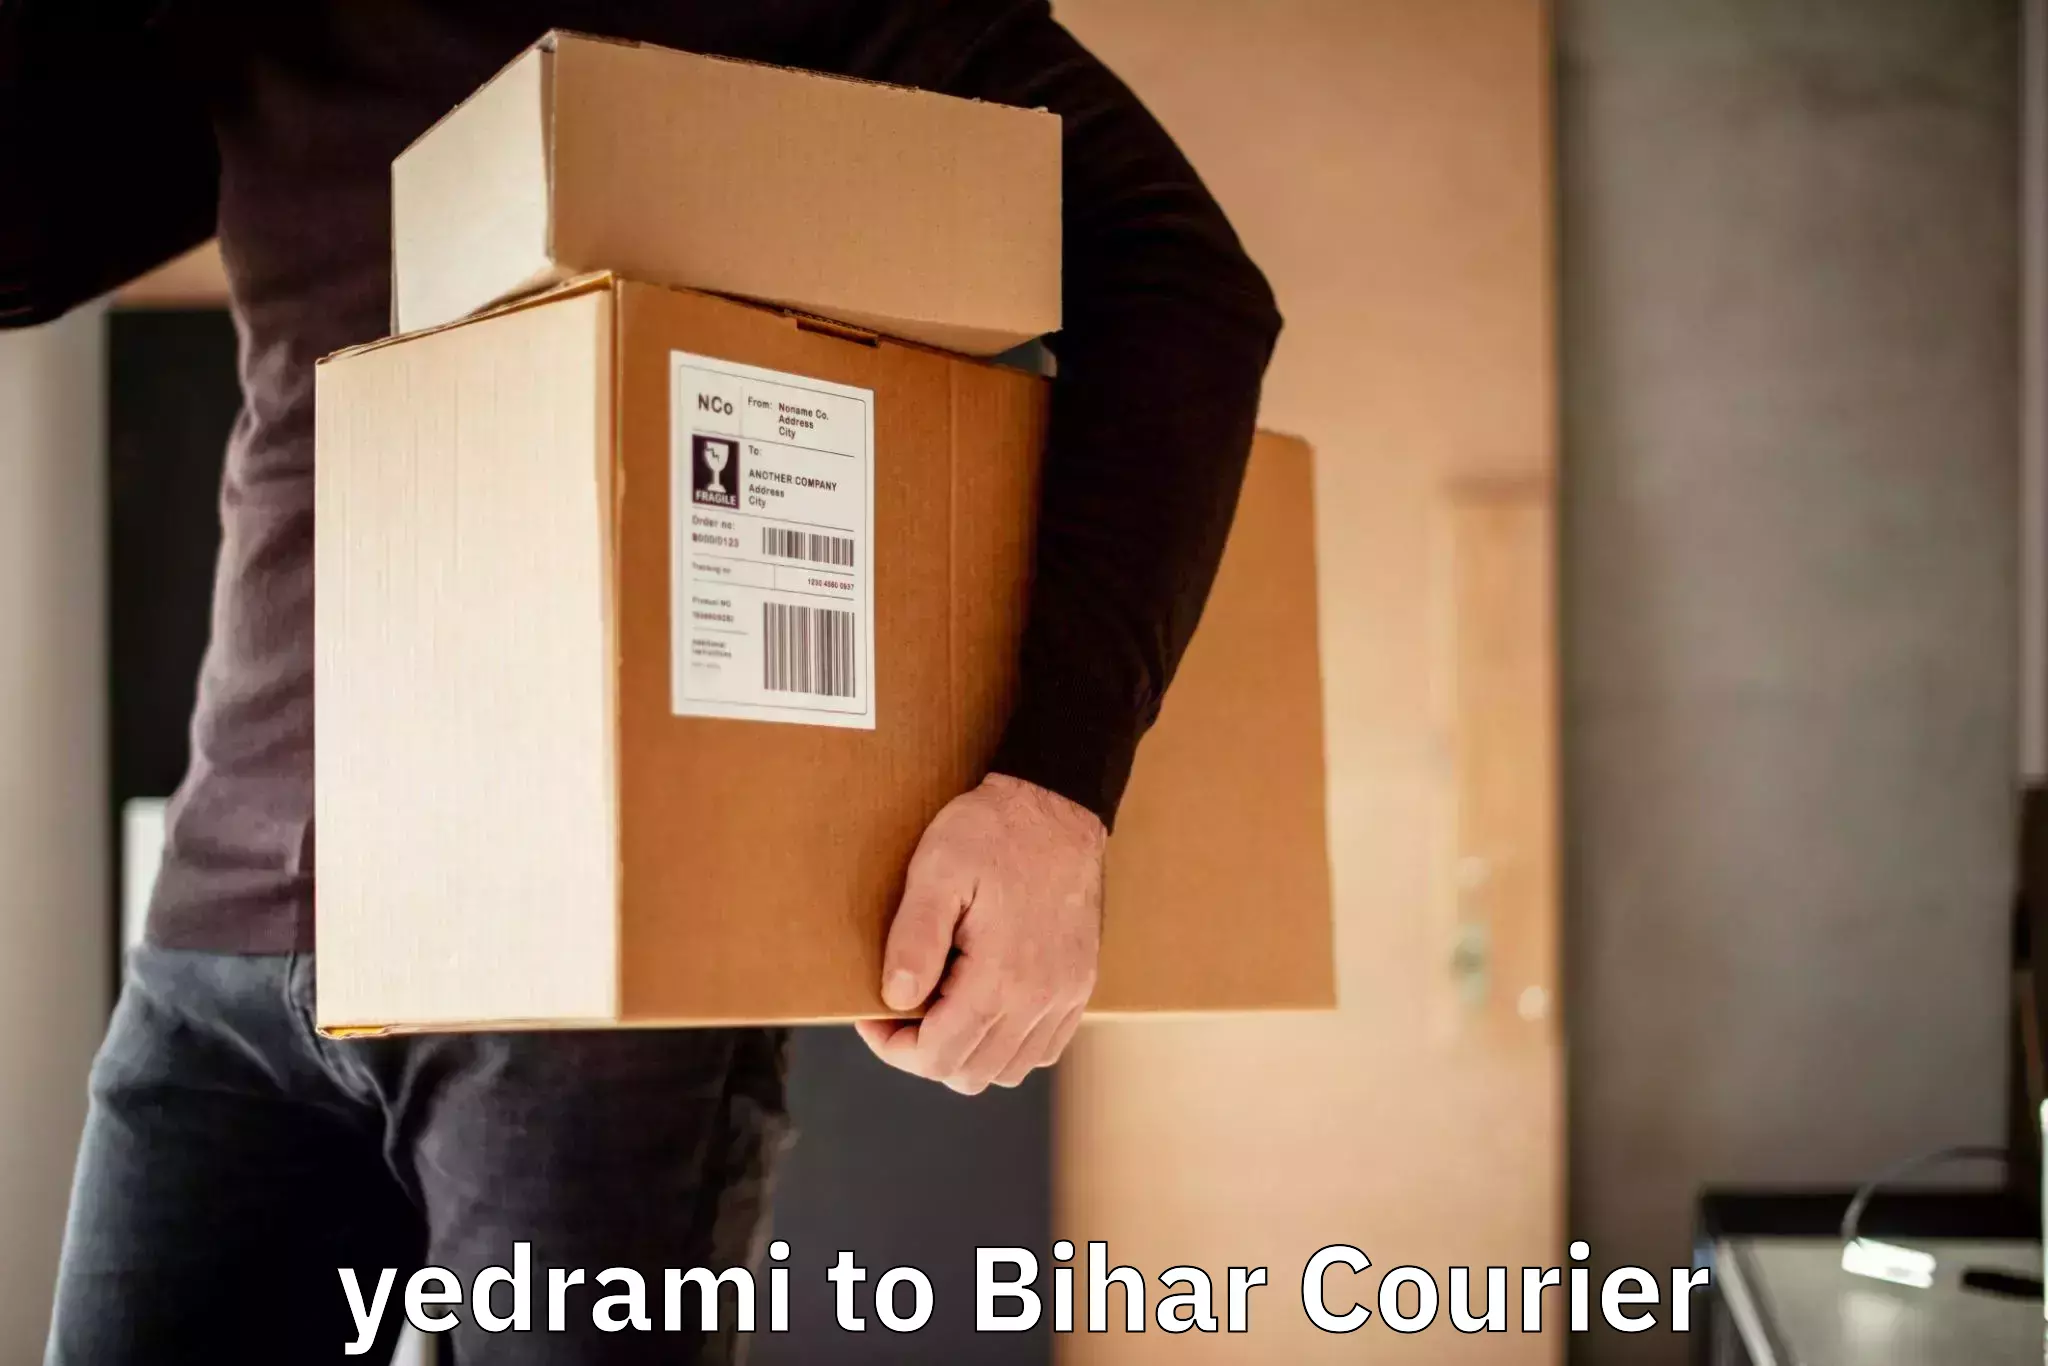 Fast delivery service yedrami to Bihar